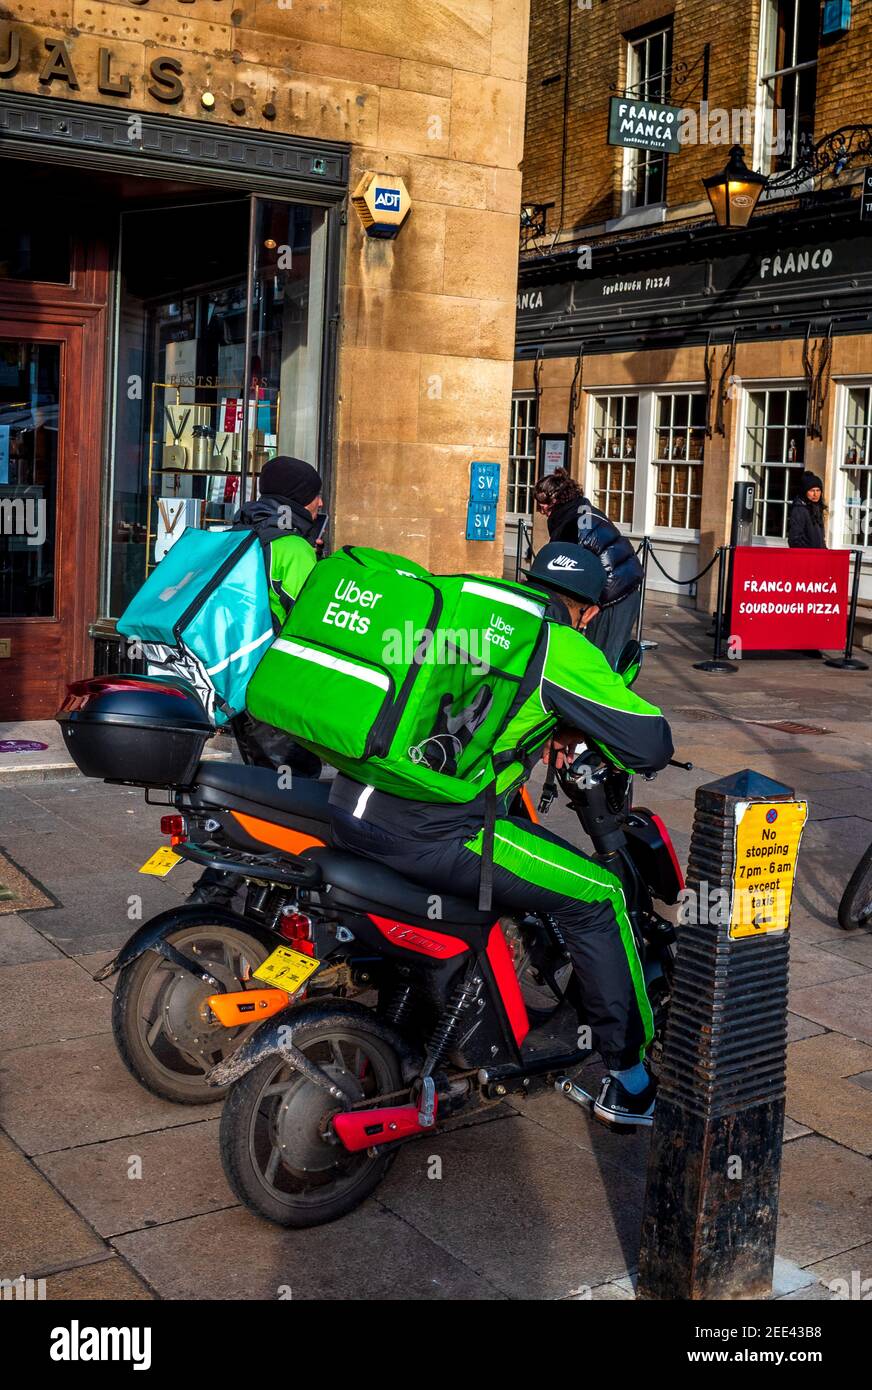 UBER Eats and Deliveroo food delivery couriers wait for order pickup outide the Franco Manca Pizzeria in Cambridge UK. Stock Photo